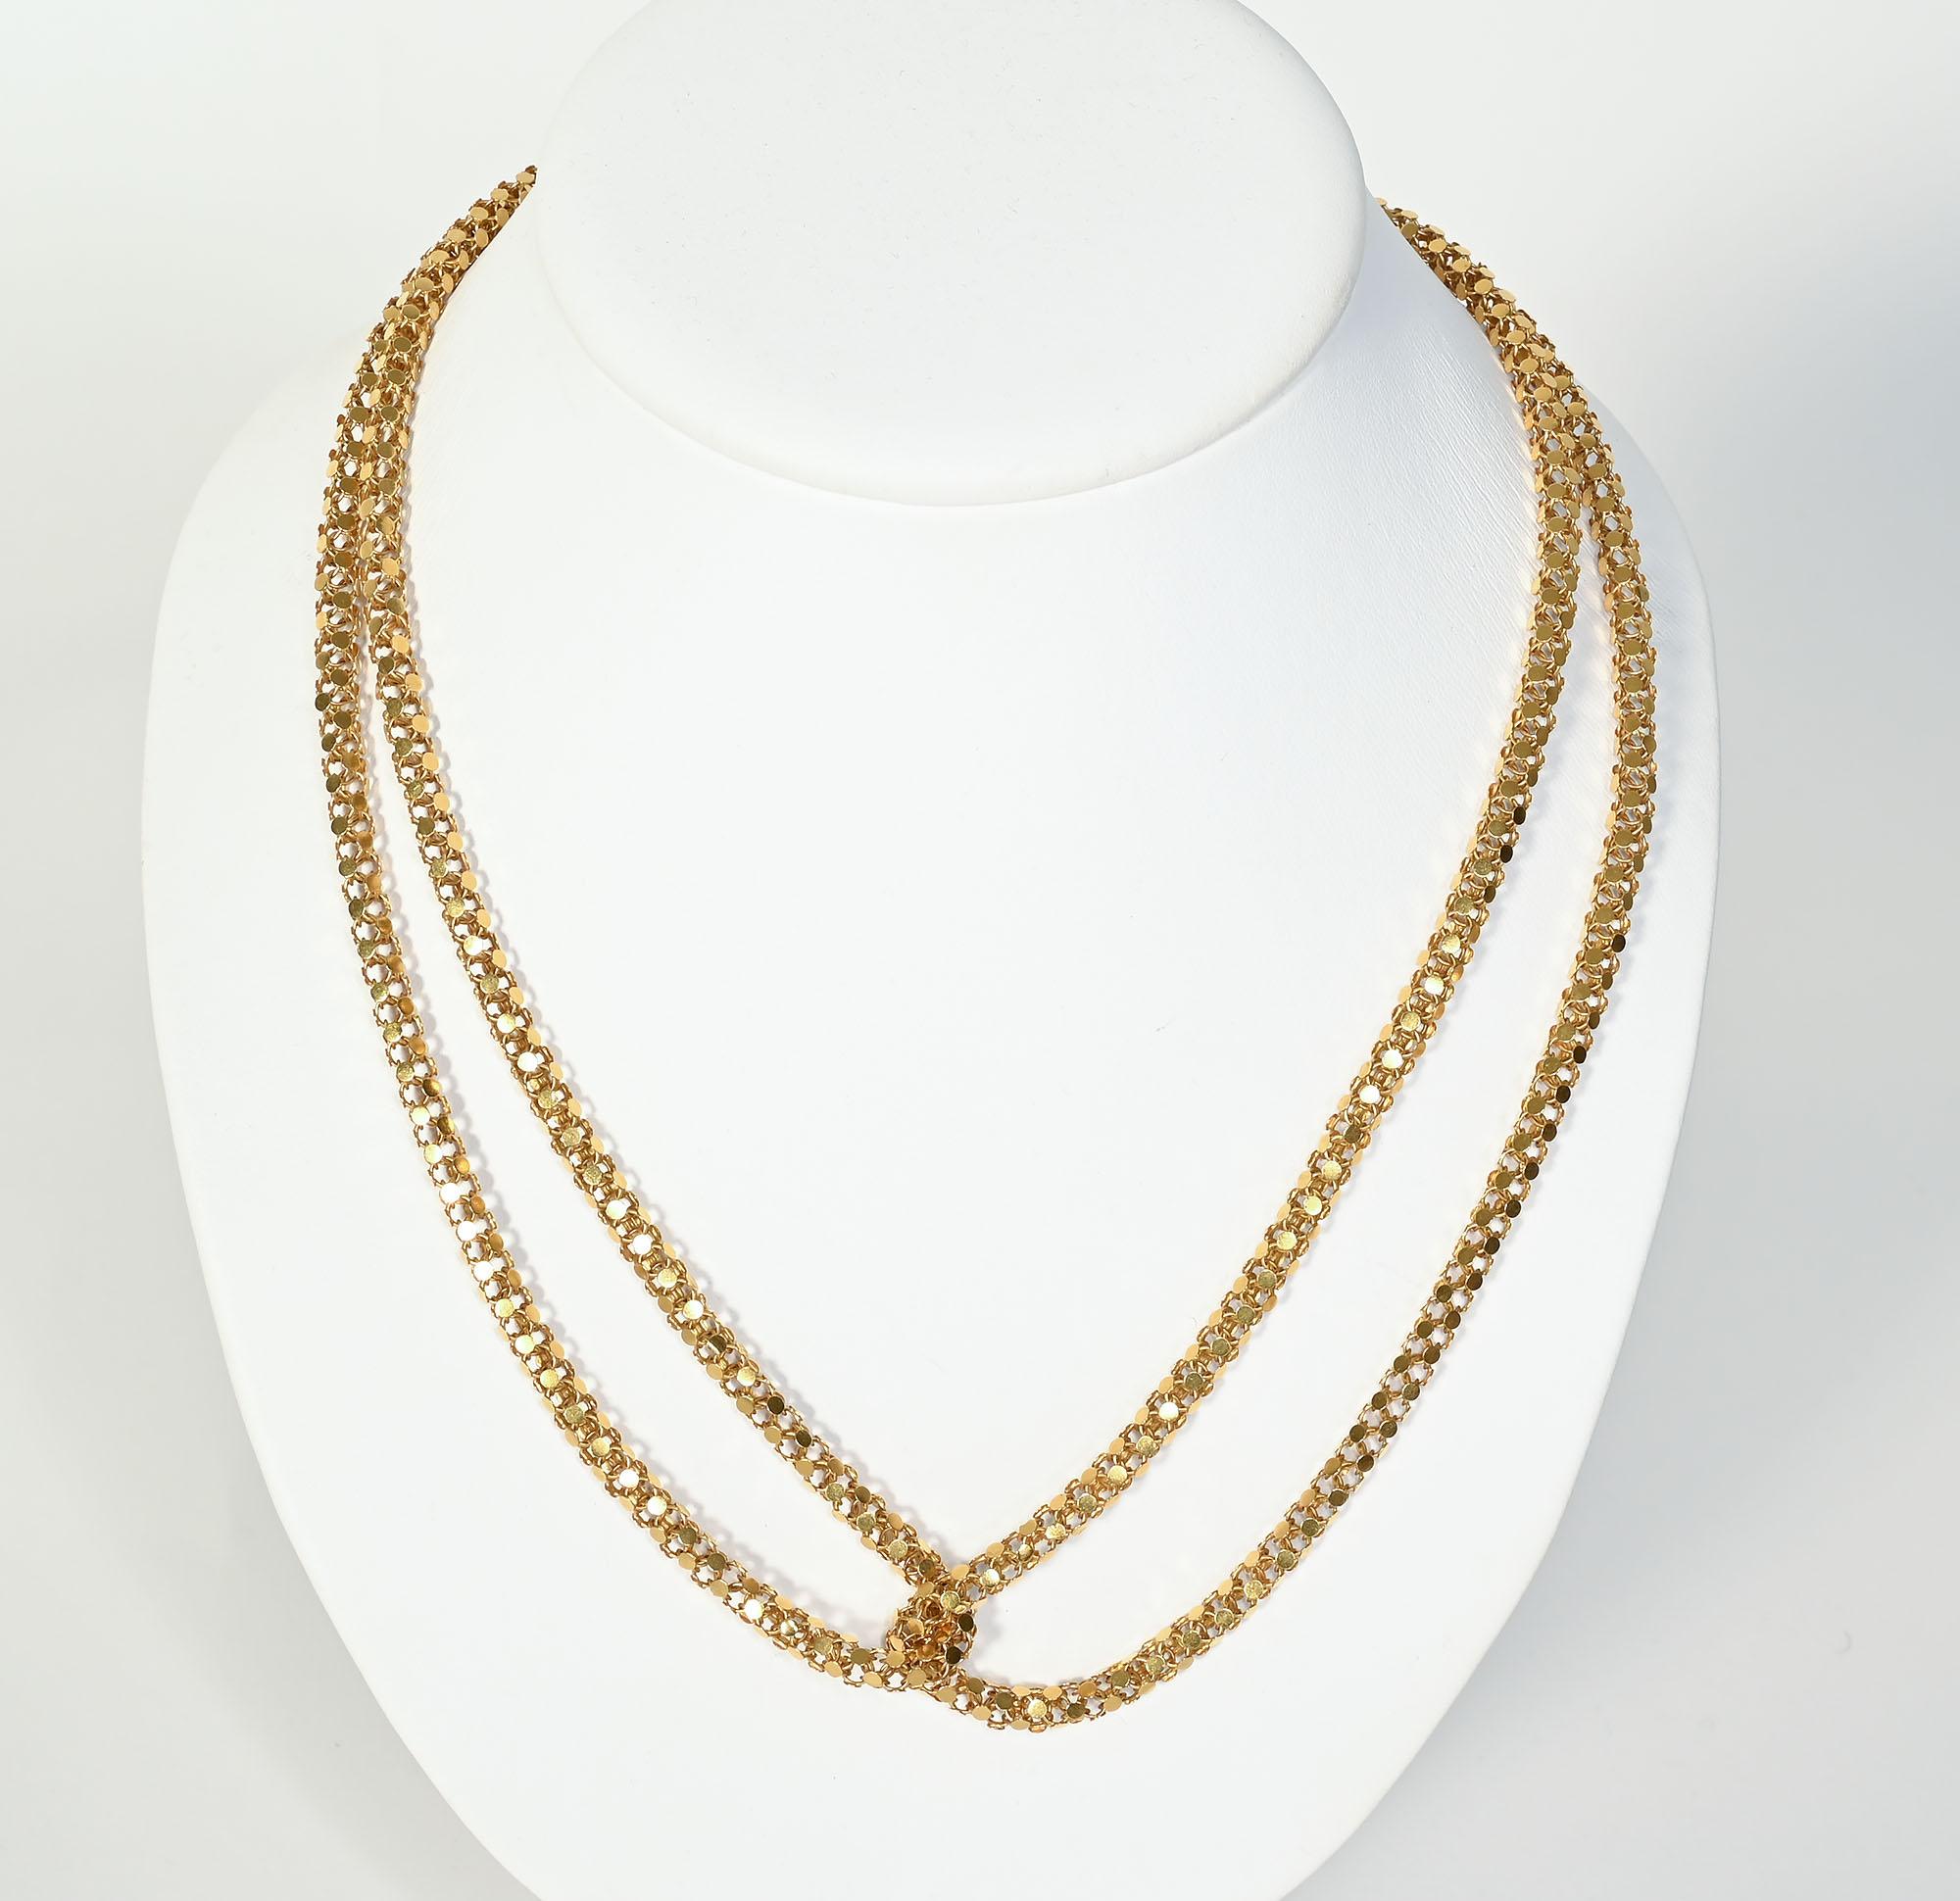 Handmade Long Gold Chain Necklace In Excellent Condition For Sale In Darnestown, MD